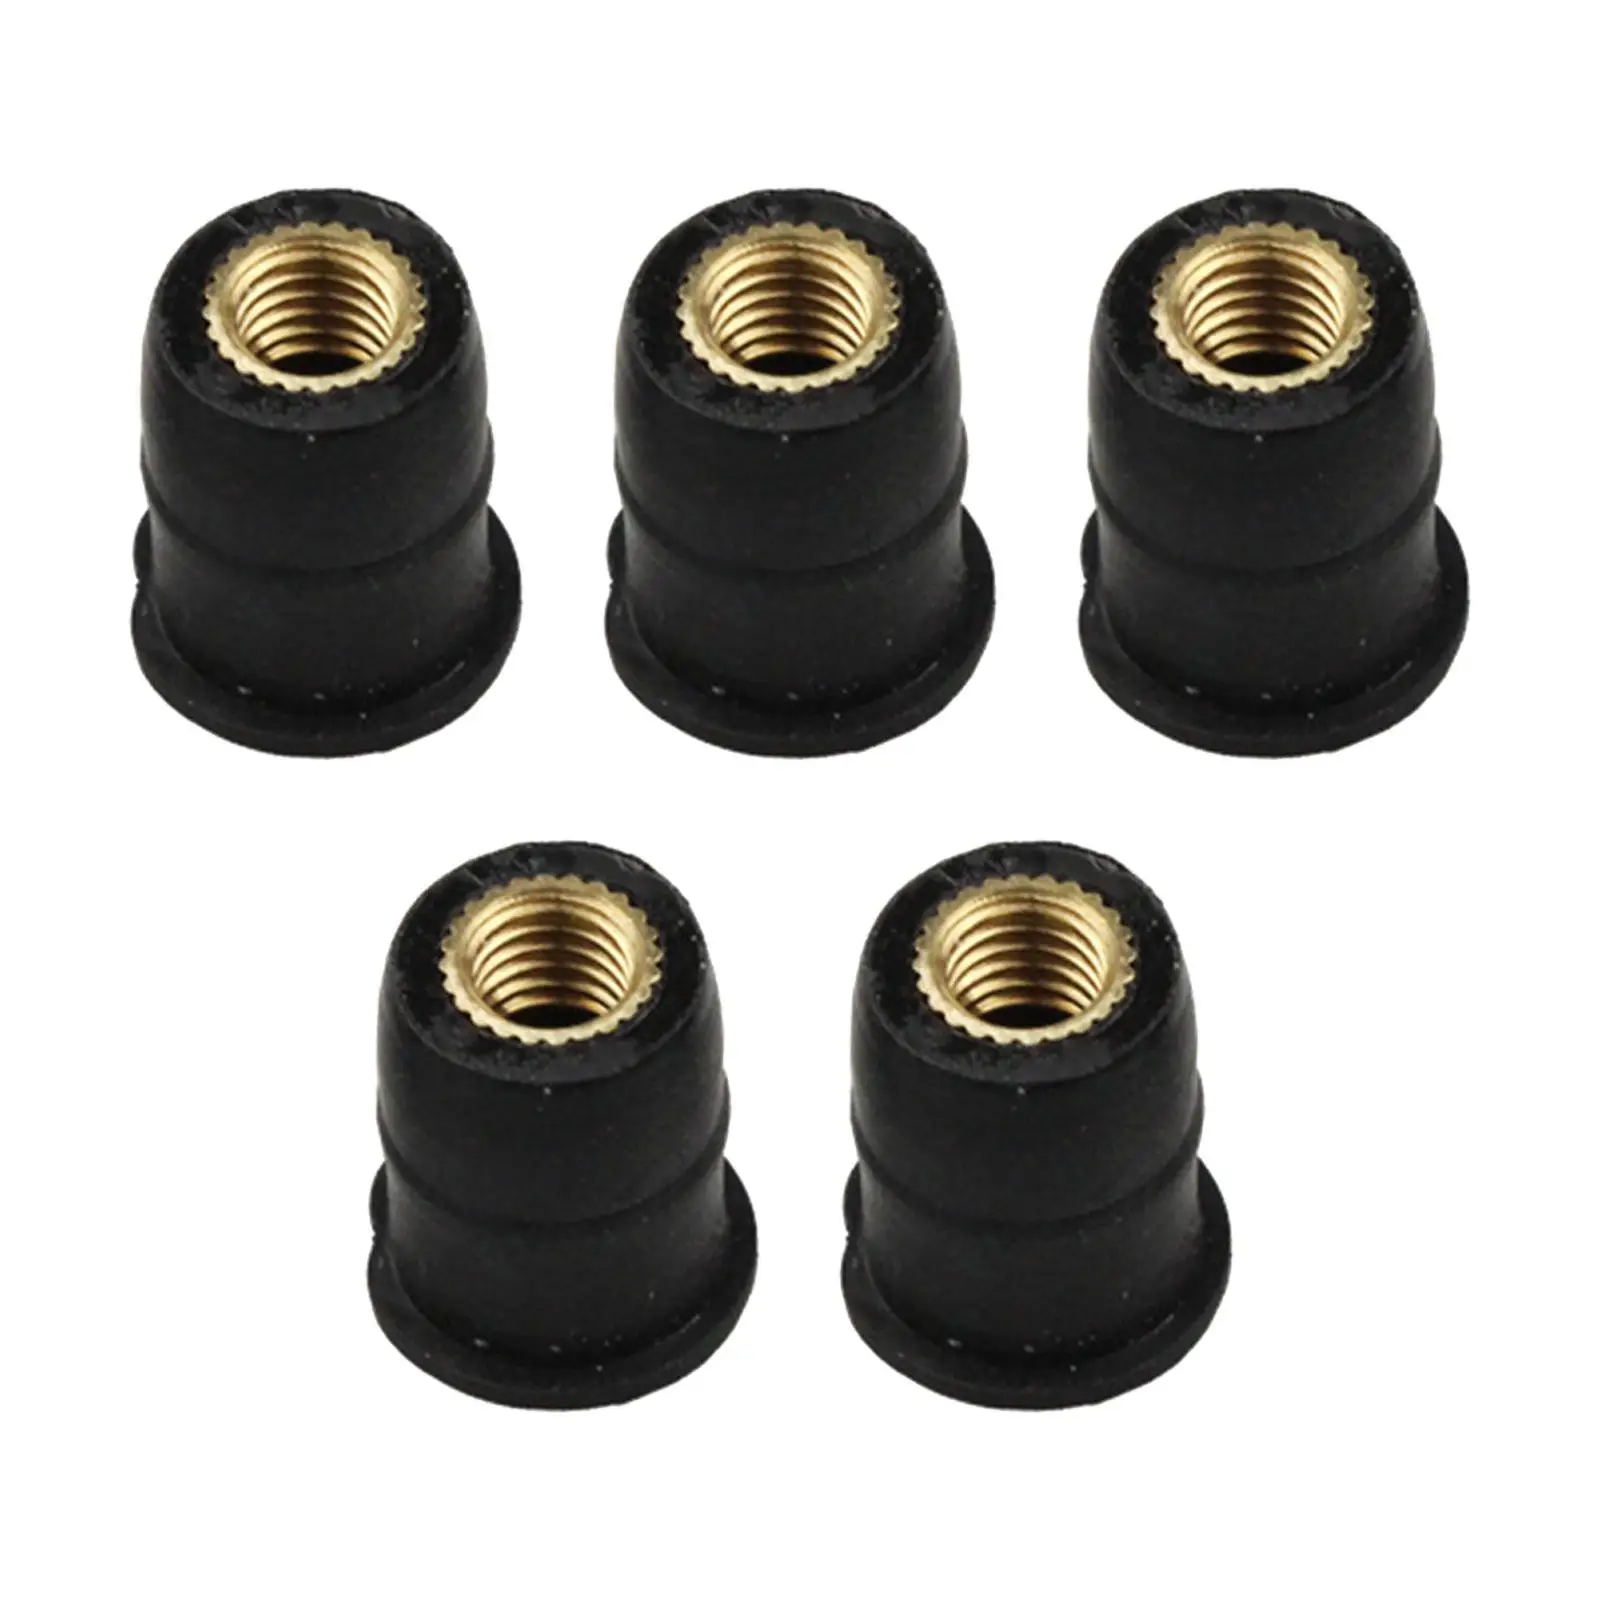 5x Windshield Rubber Well Nut Parts Motorcycle Fastener for Kayak Canoe